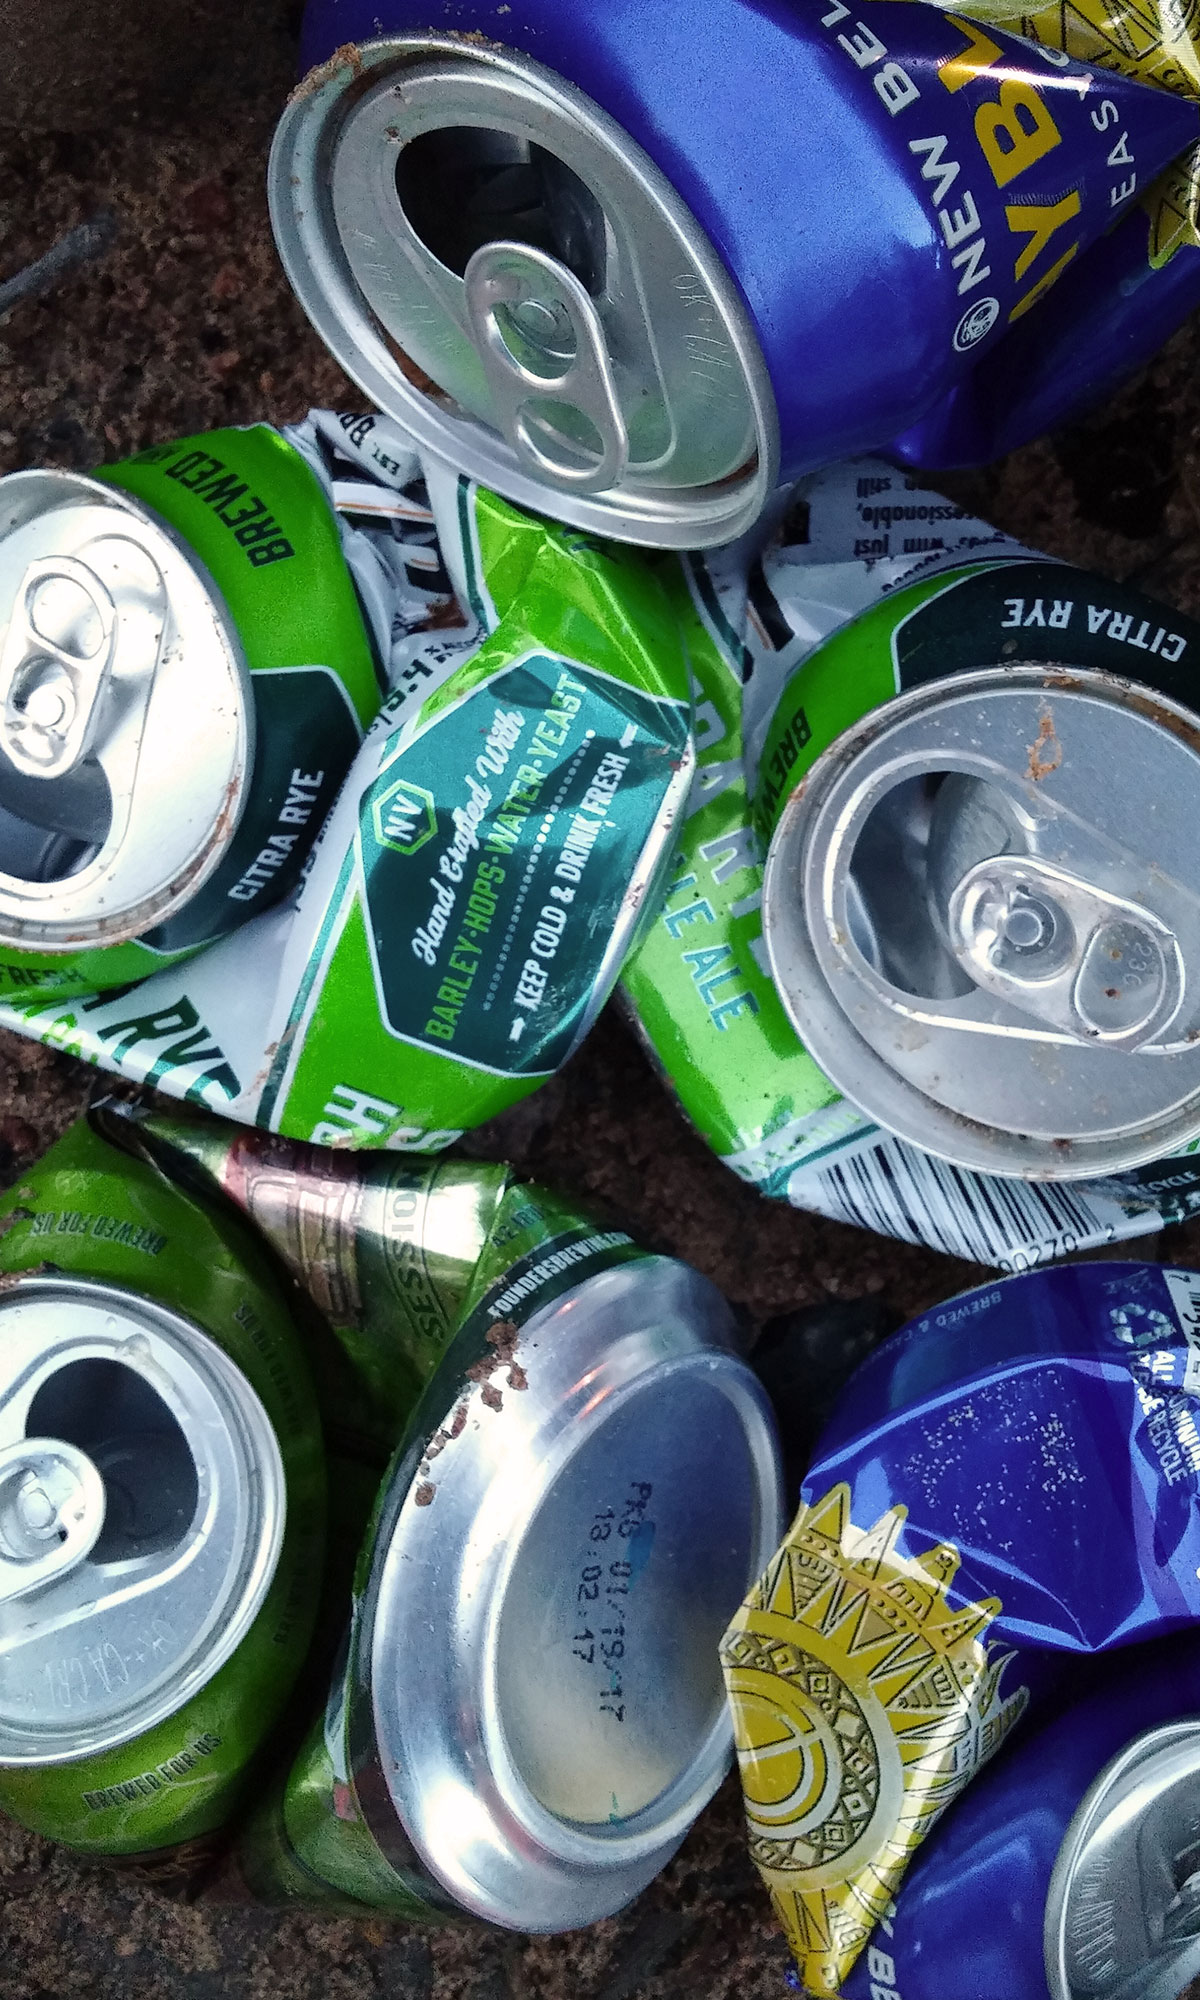 Crushed aluminum cans ready for recycling.